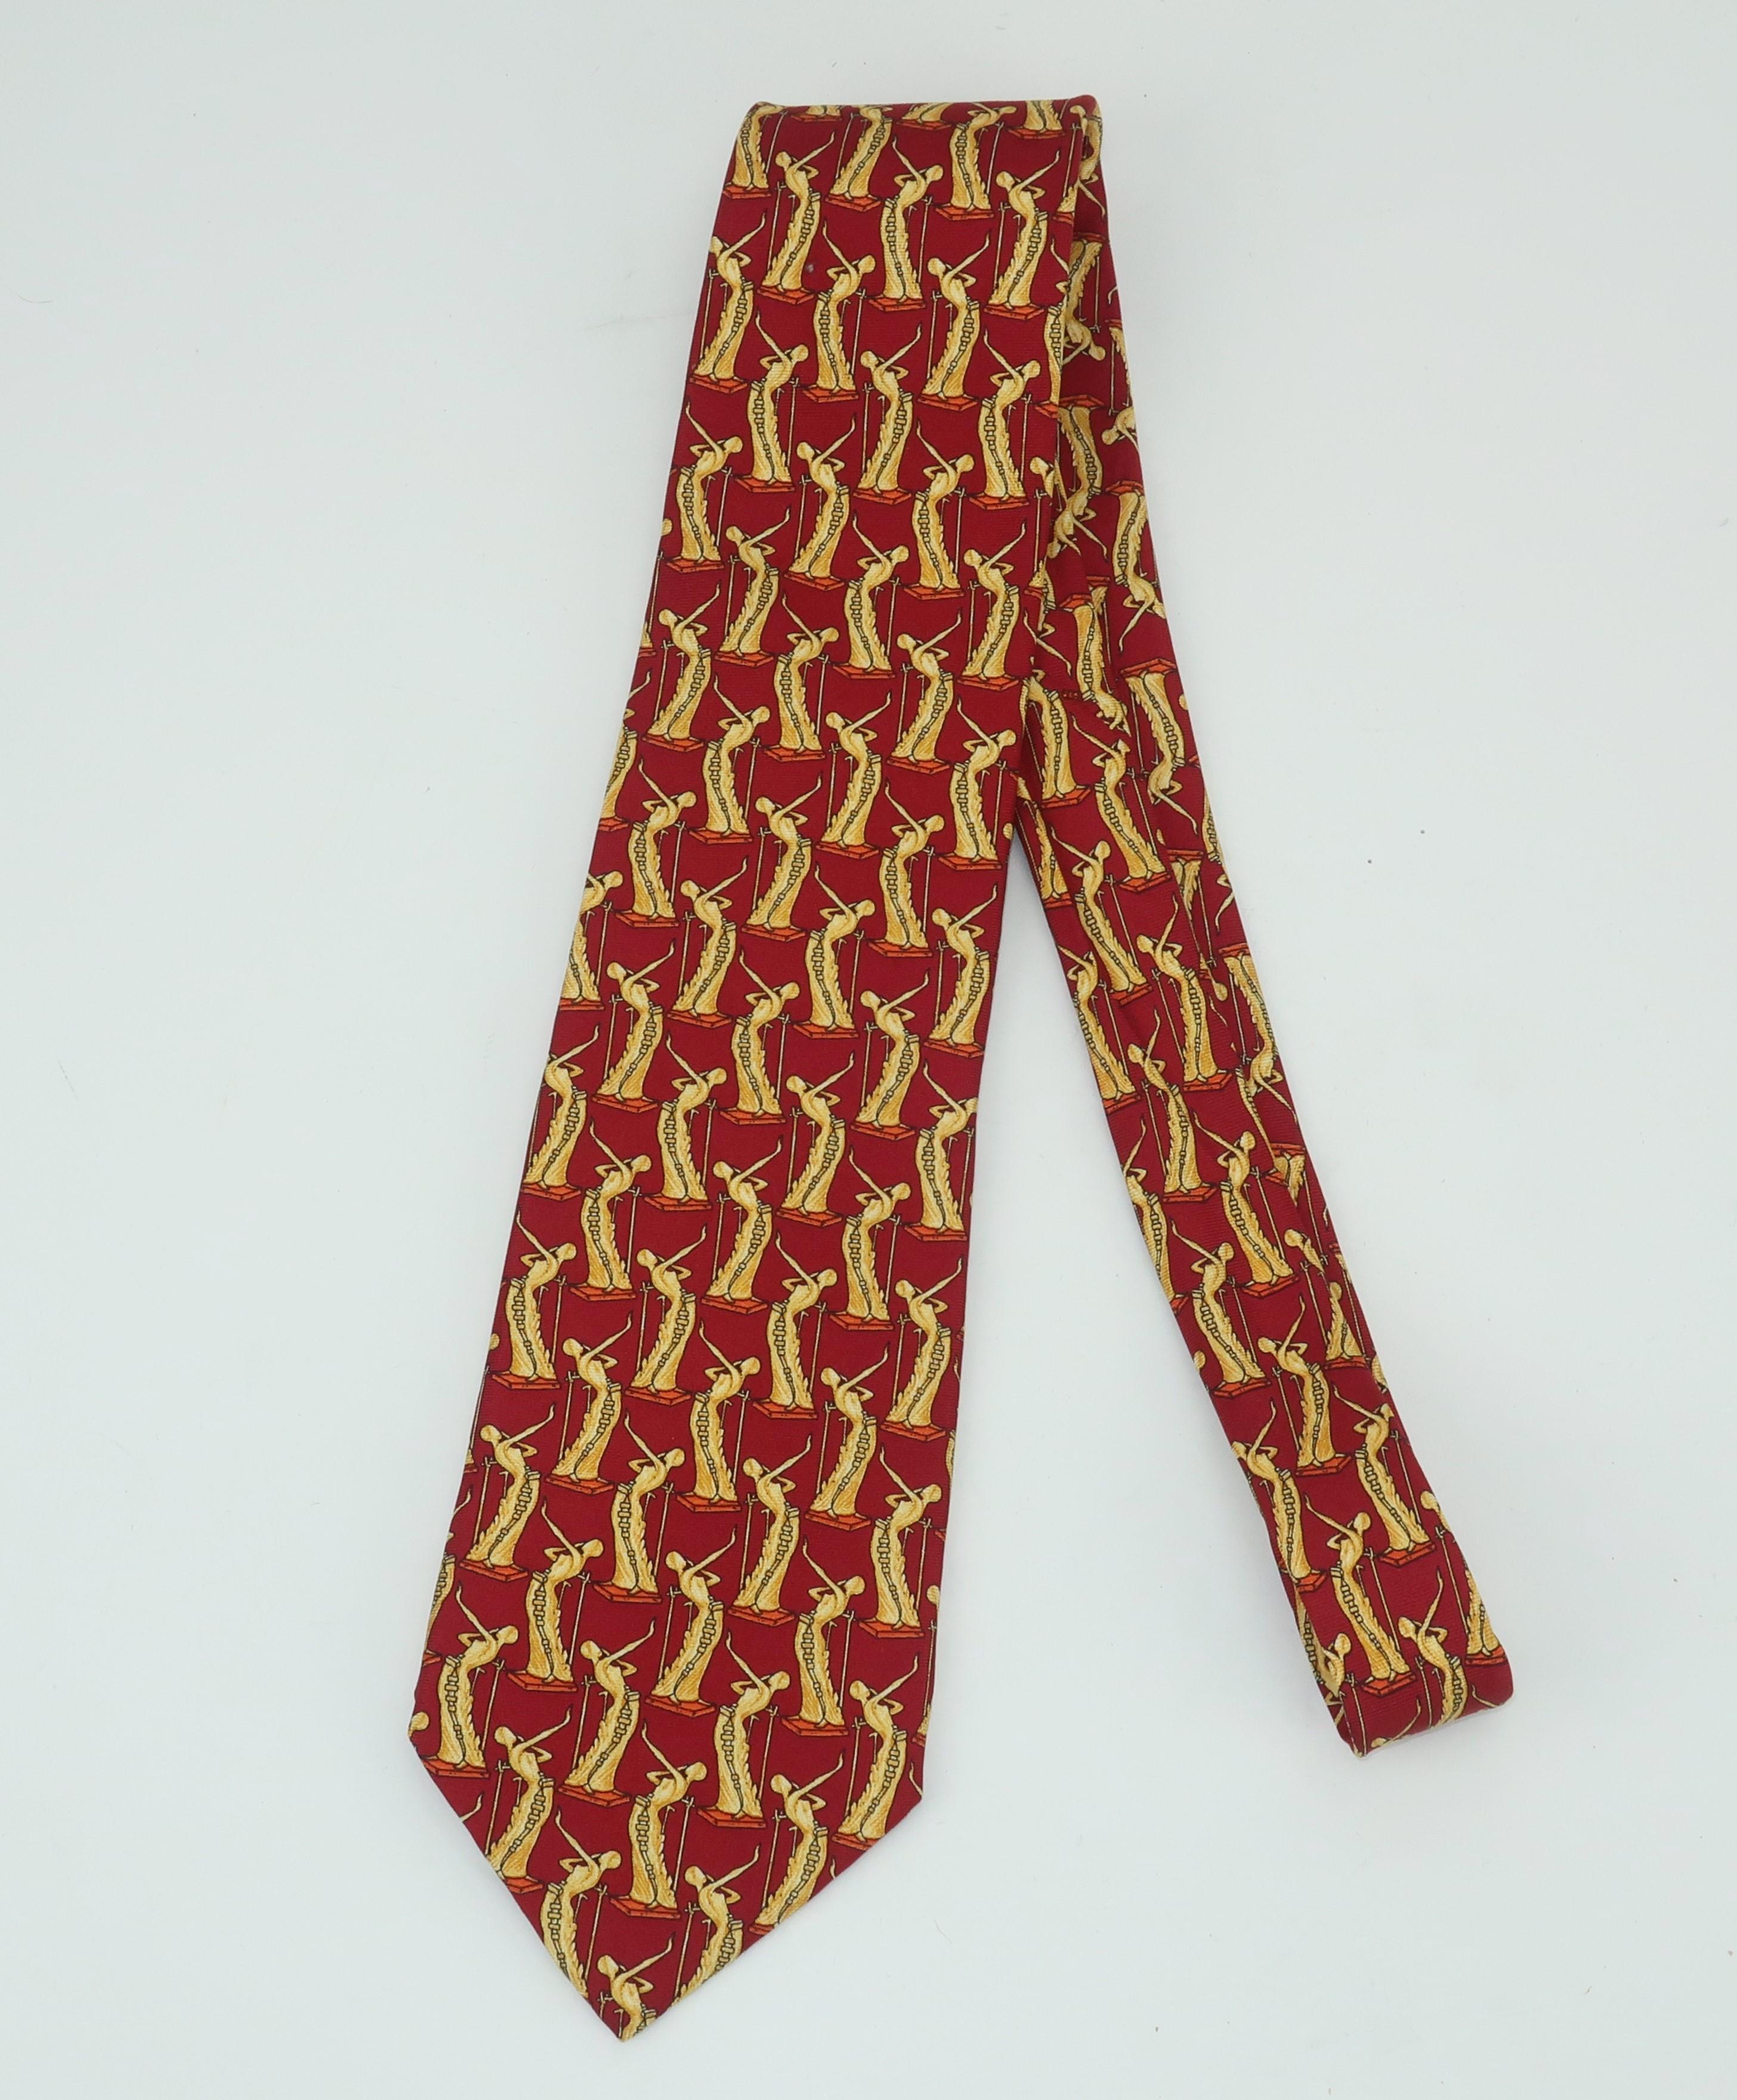 A 1980's Italian made silk necktie featuring the image of a C.1980 surrealist sculpture by Salvador Dali entitled 'La Femme En Flammes'.  The images are repeated in a pattern incorporating shades of brick red, buttery yellow with the hint of